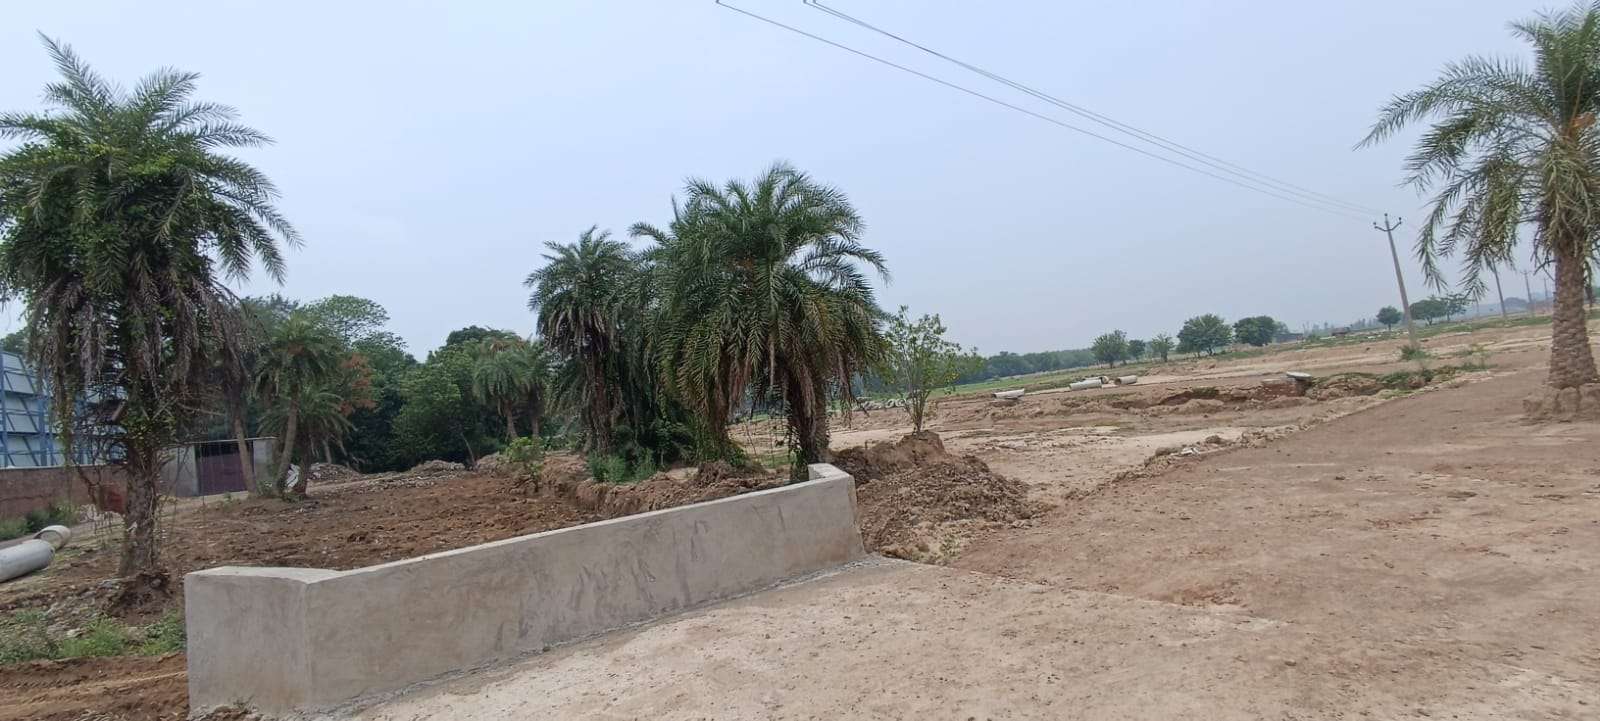 Residential Plots on Chandigarh-Ludhiana Highway within a gated township.